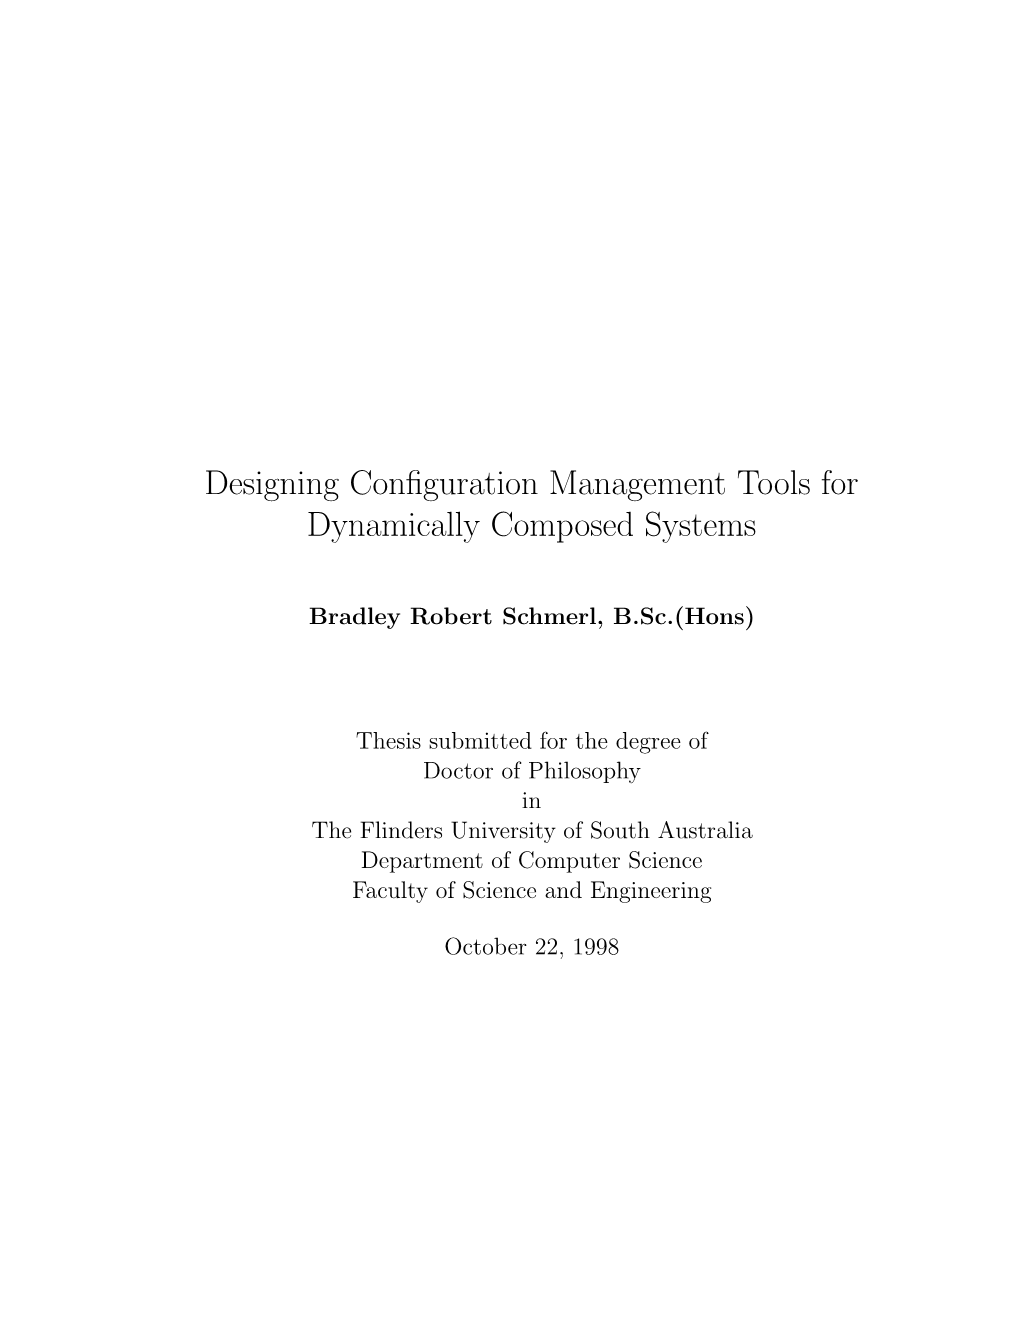 Designing Configuration Management Tools for Dynamically Composed